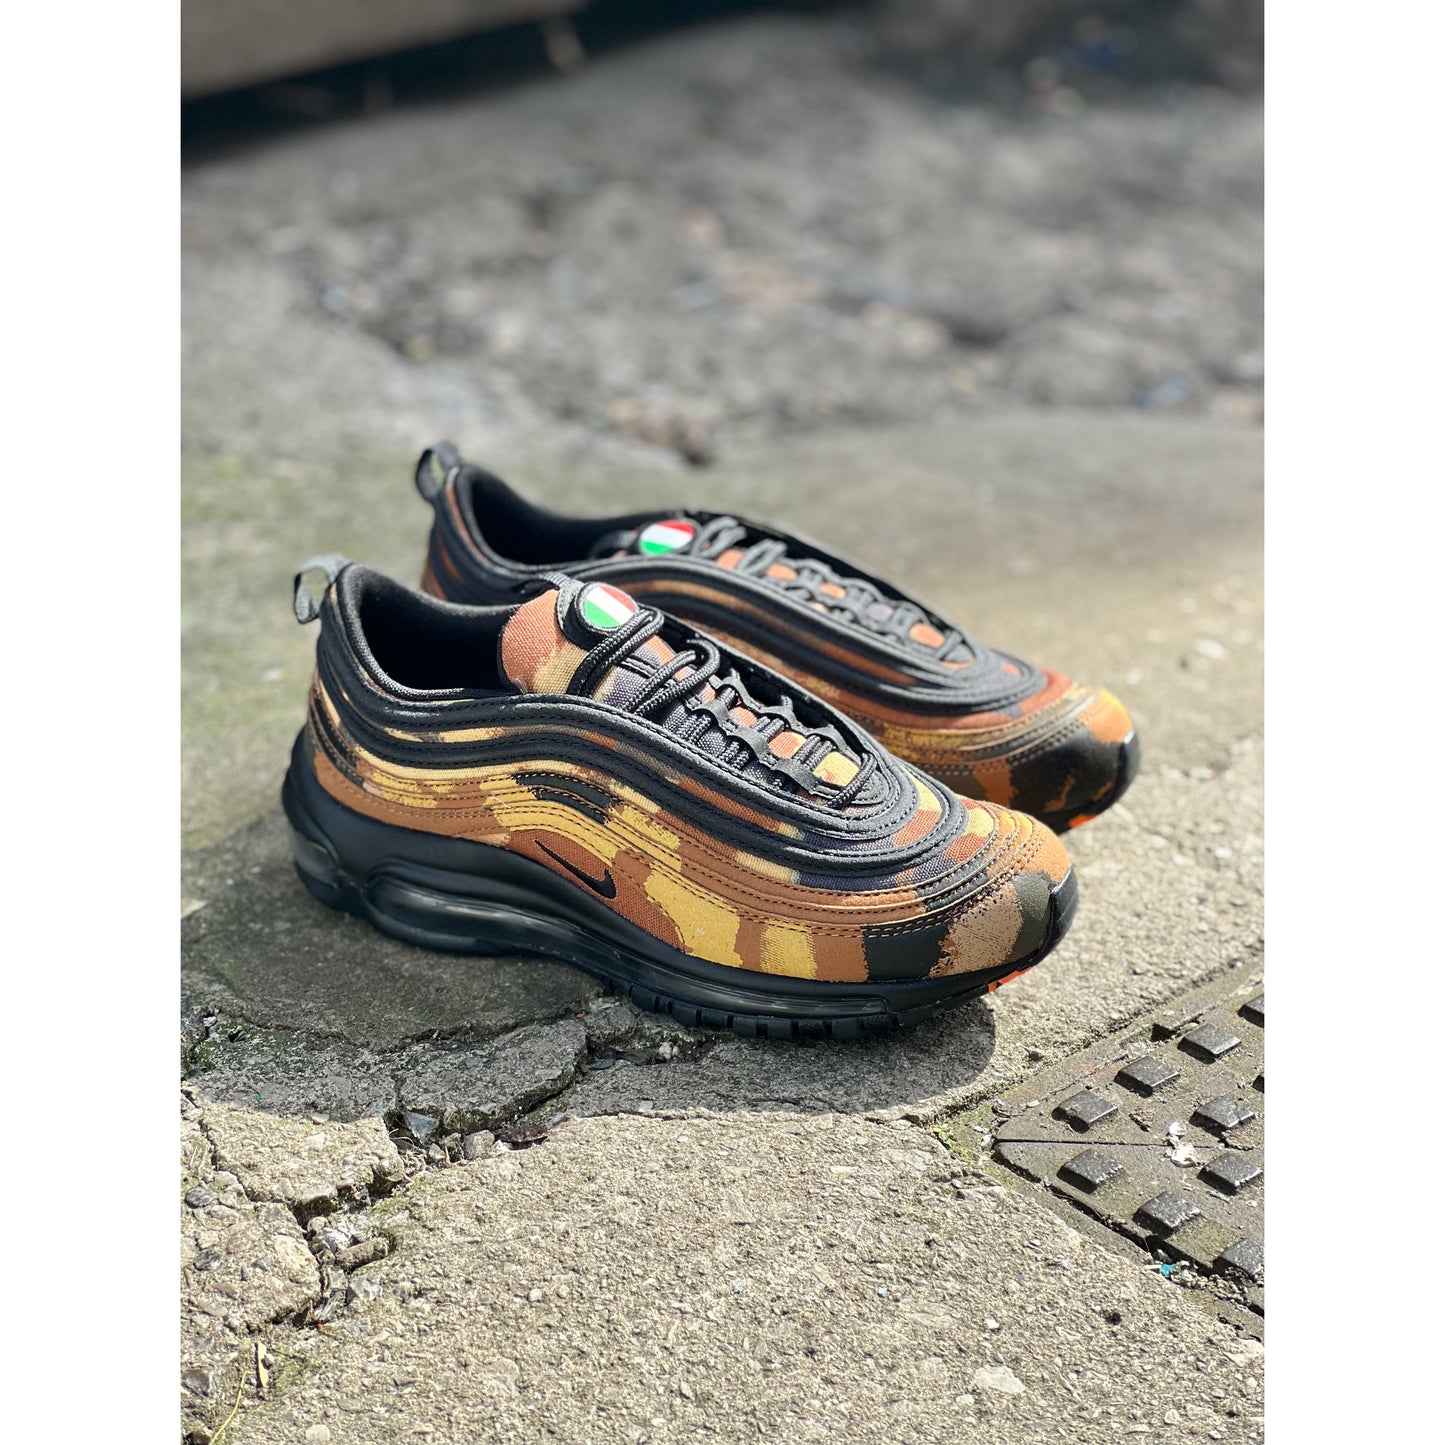 Nike Air Max 97 Country Camo Italy from Nike